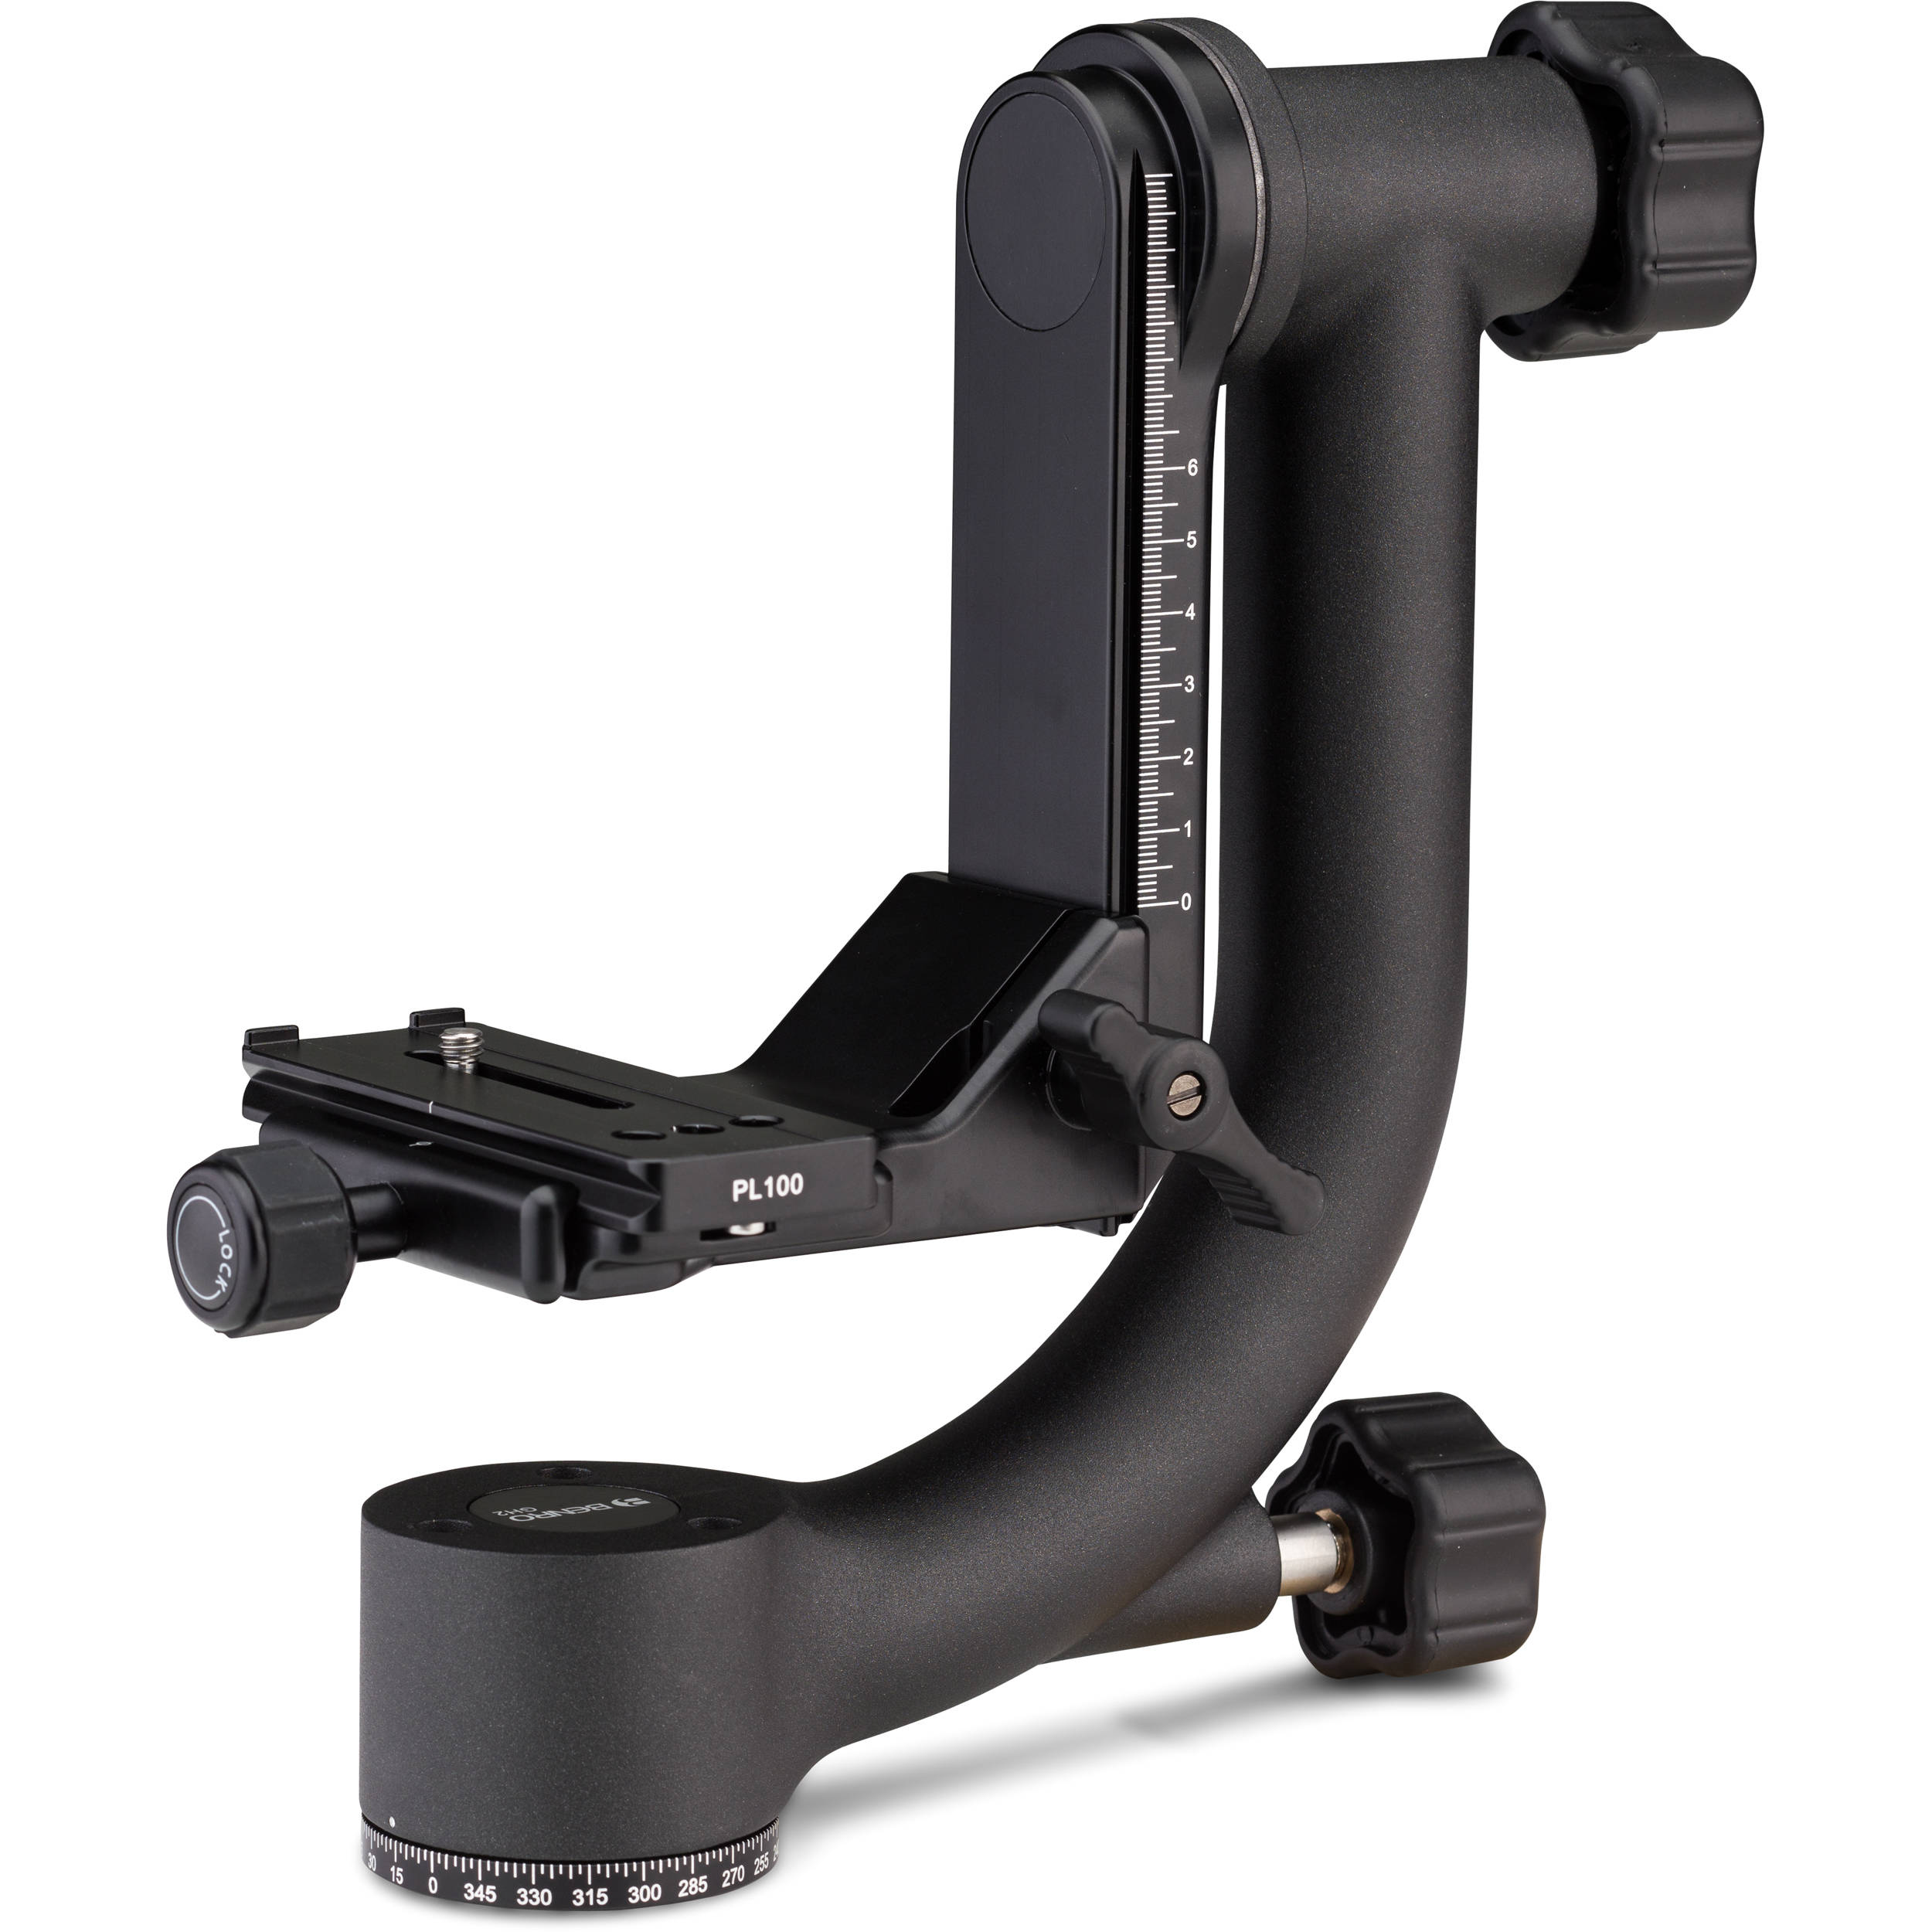 benro gh2 gimbal head review